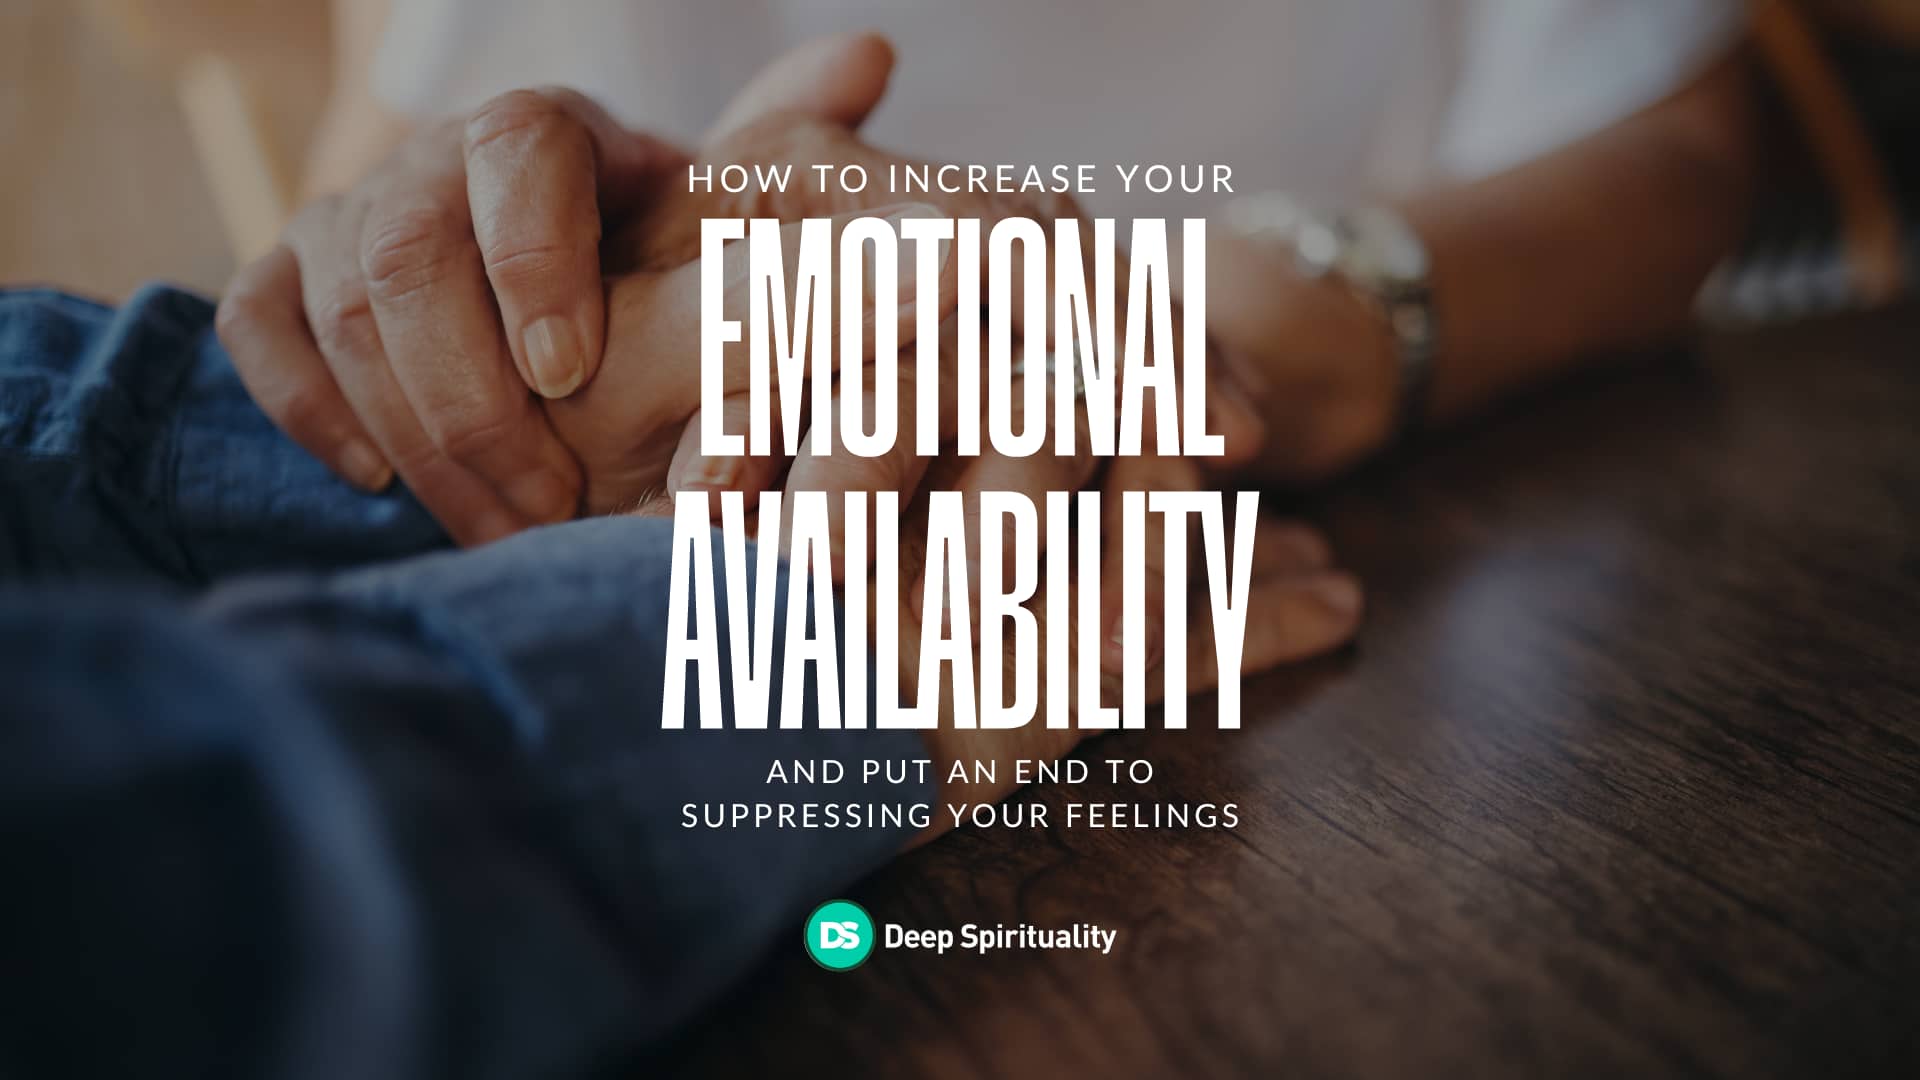 How to Increase Your Emotional Availability and Put an End to Suppressing Your Feelings 4